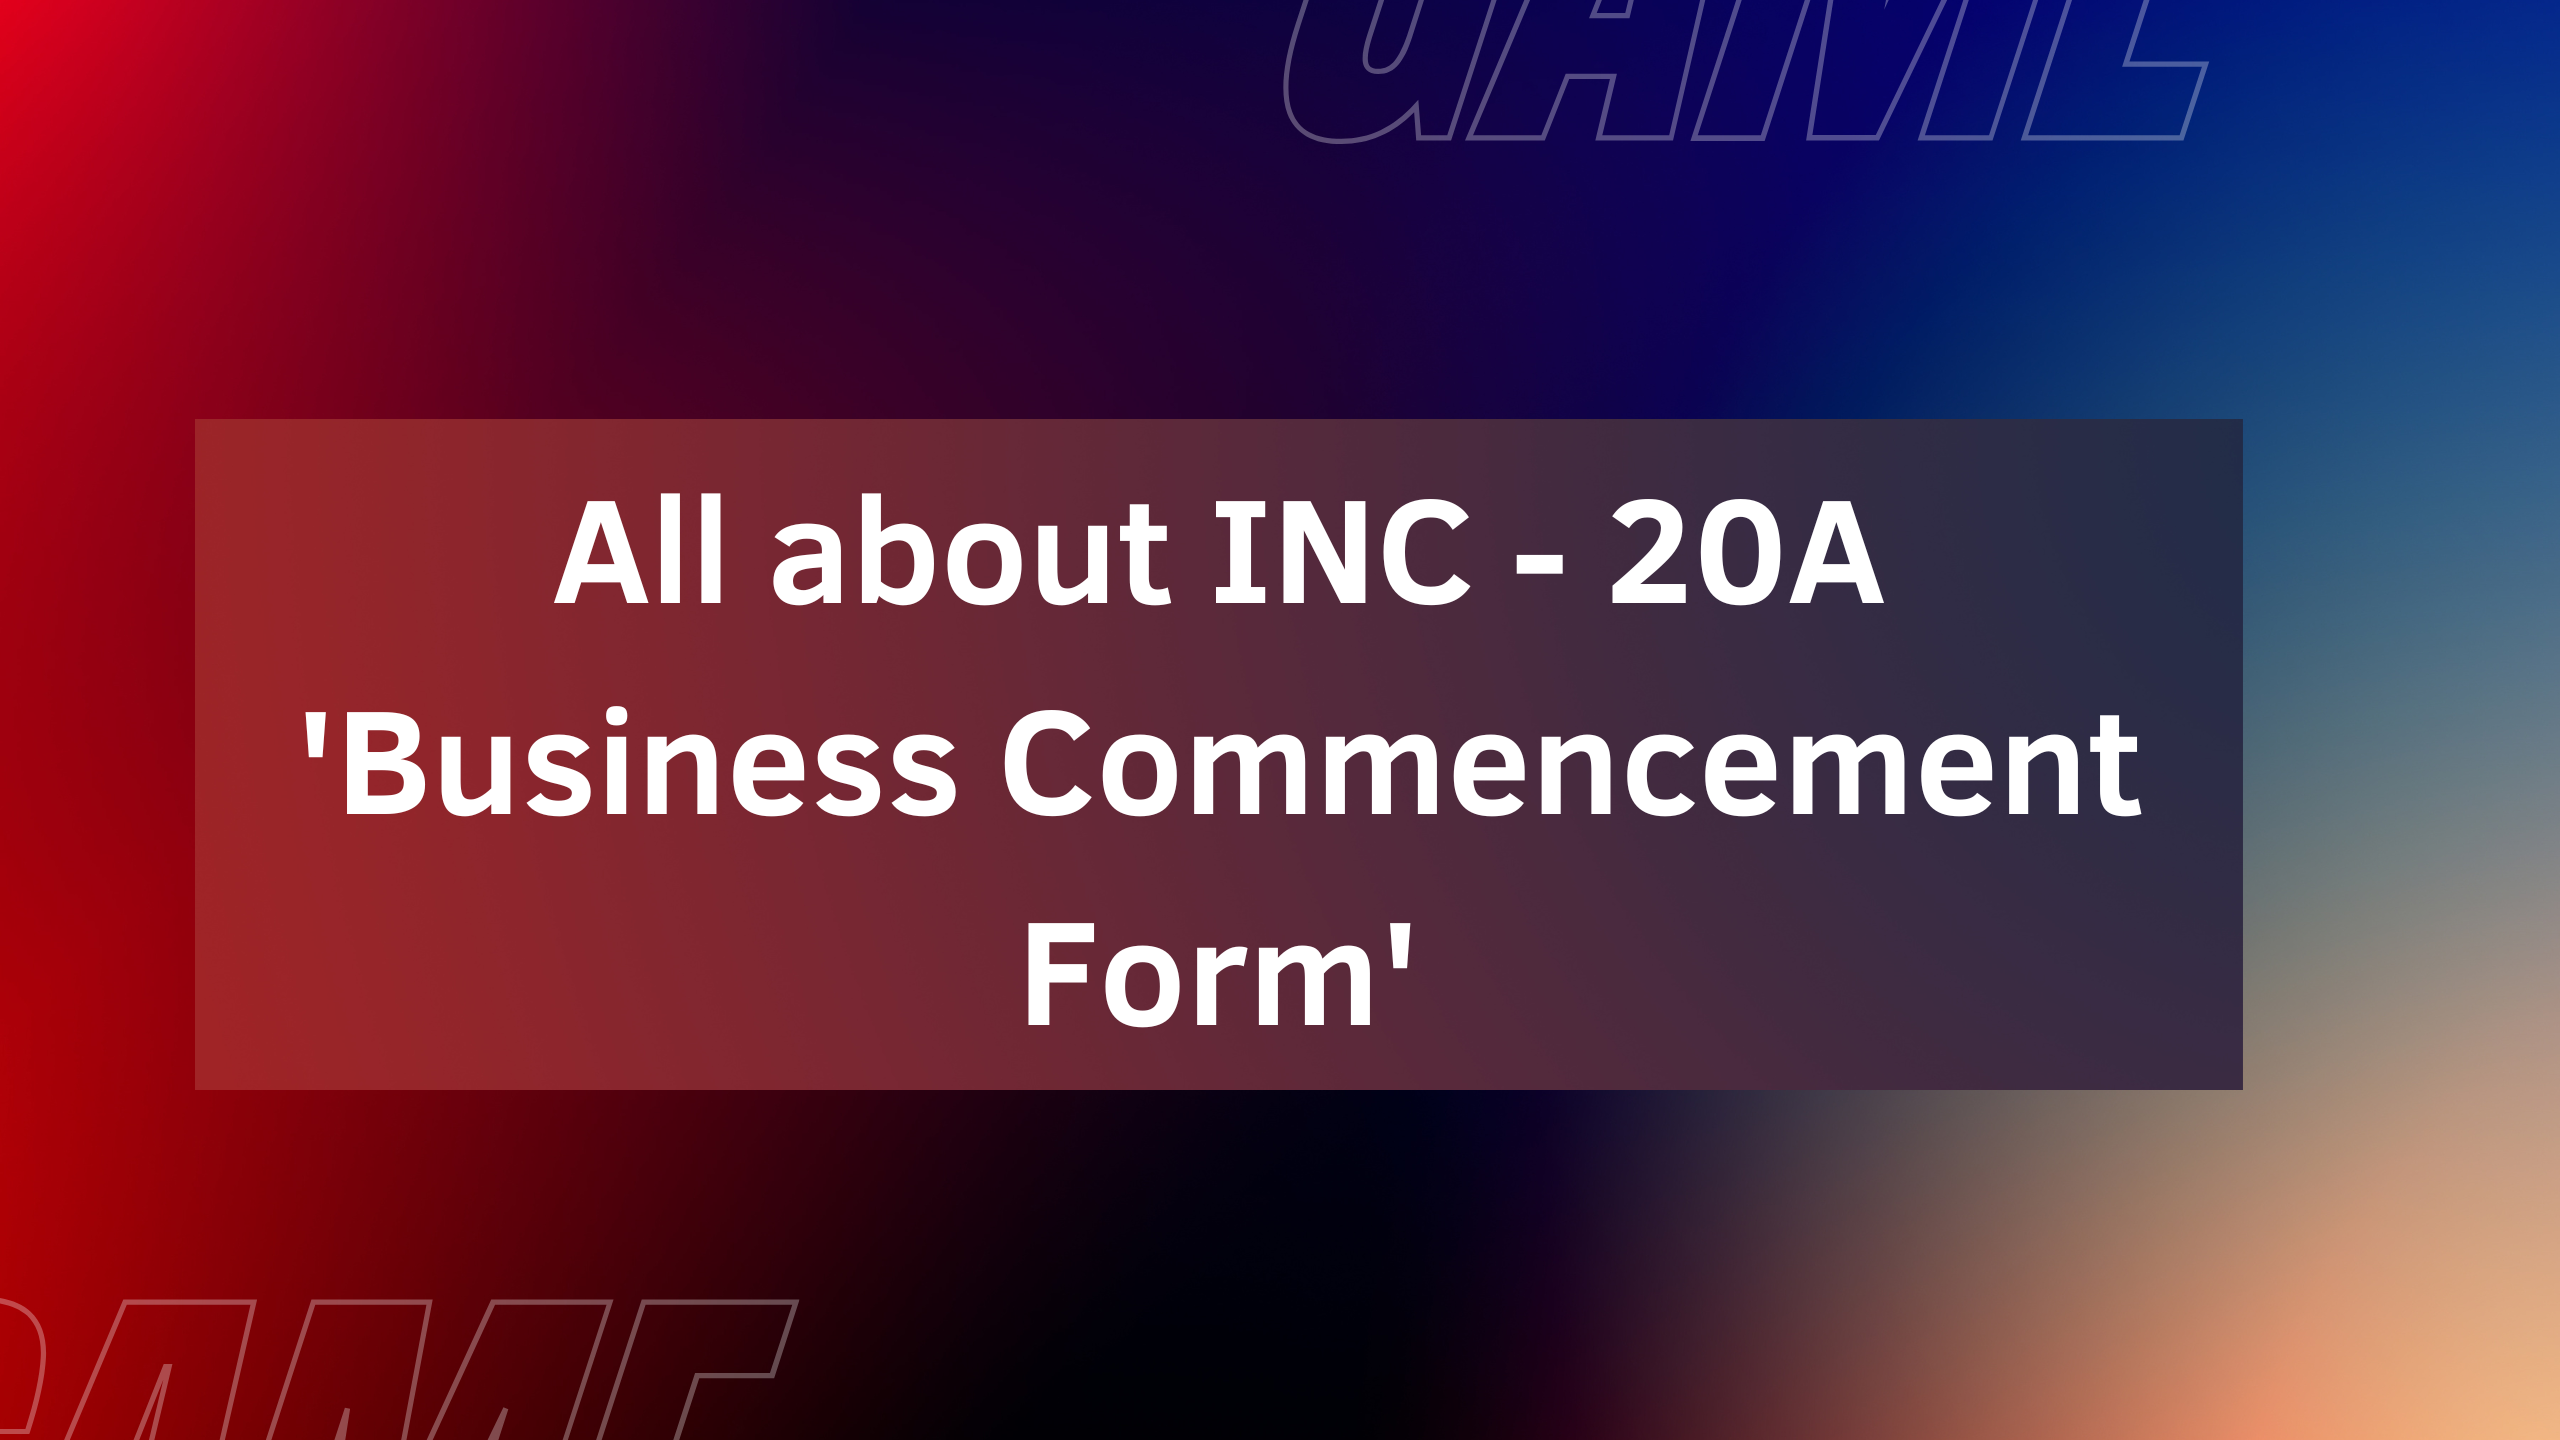 All about INC - 20A 'Business Commencement Form'